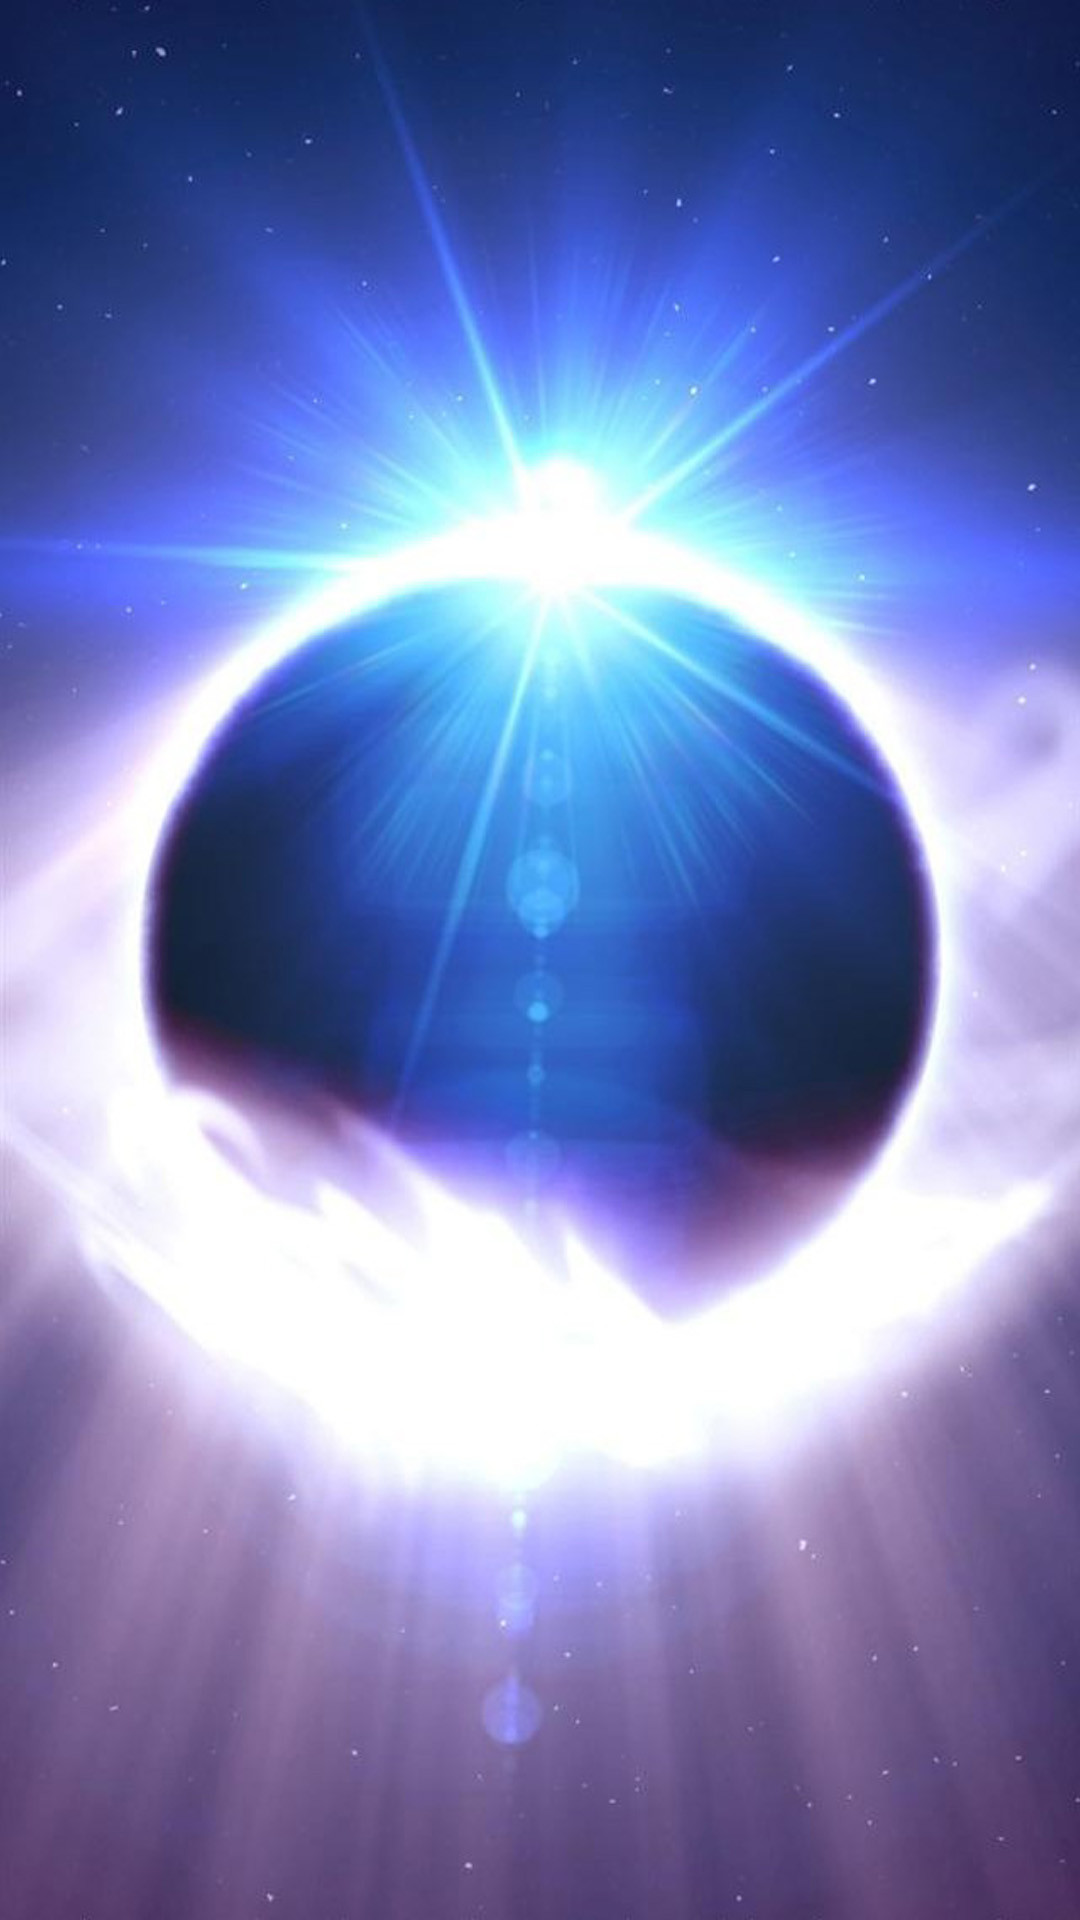 Space Solar Eclipse iPhone 6 wallpaper